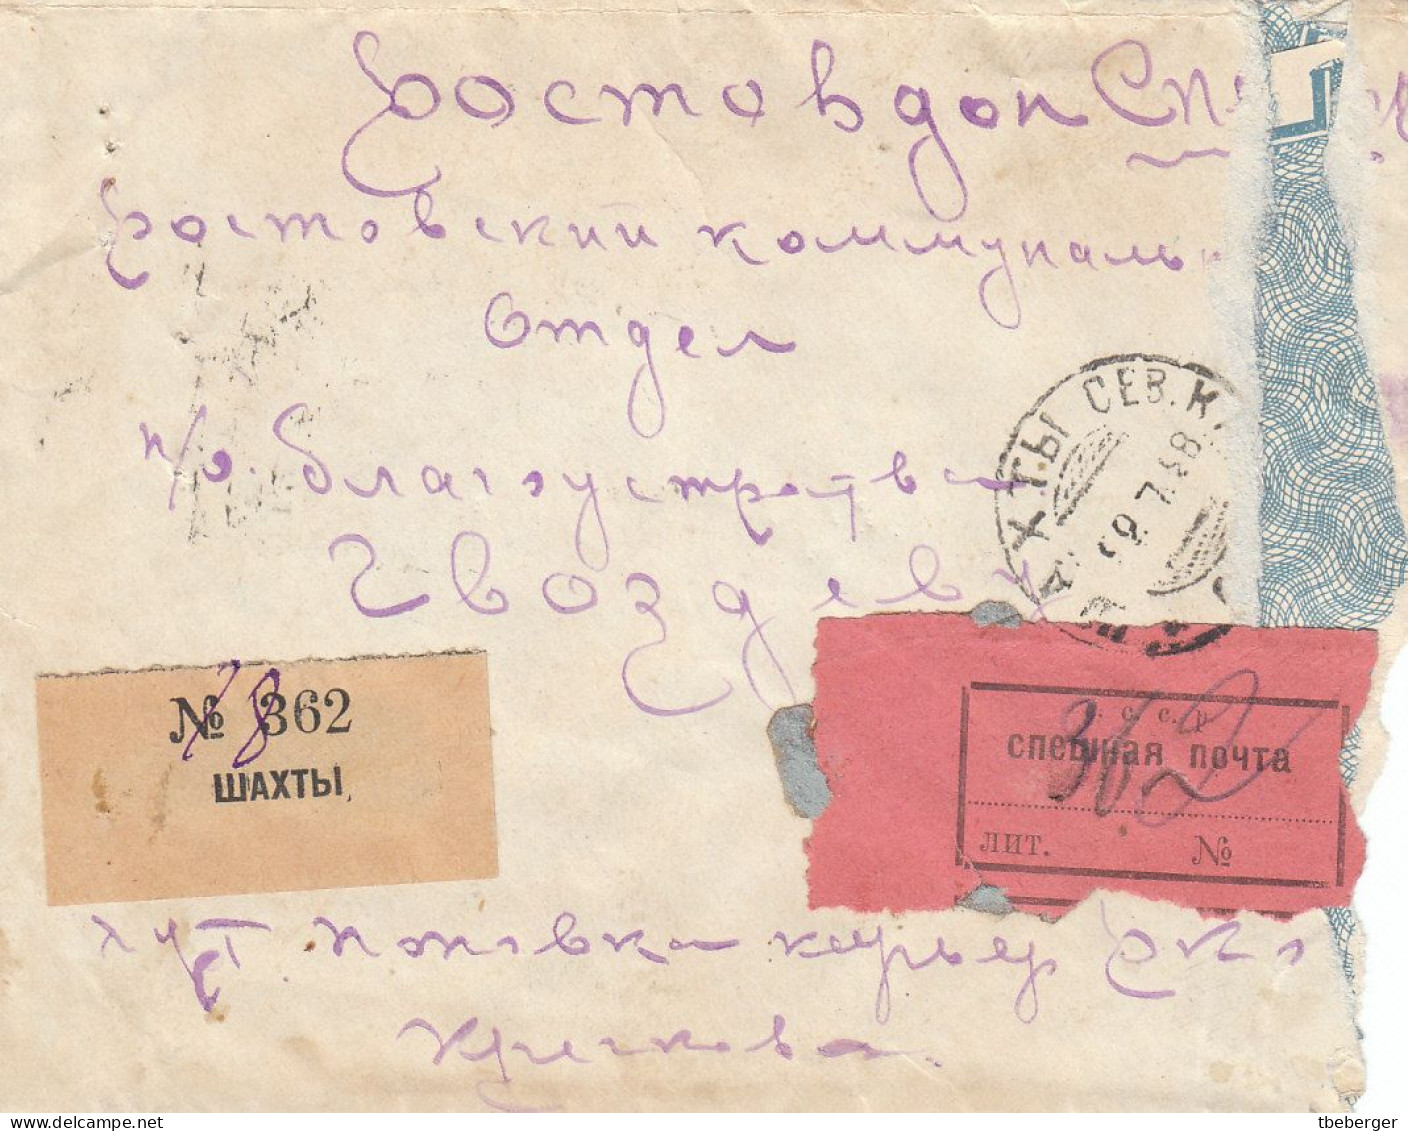 Russia USSR 1928 Special Post Express Mail SHAKHTY To ROSTOV, Ex Miskin (40) - Cartas & Documentos